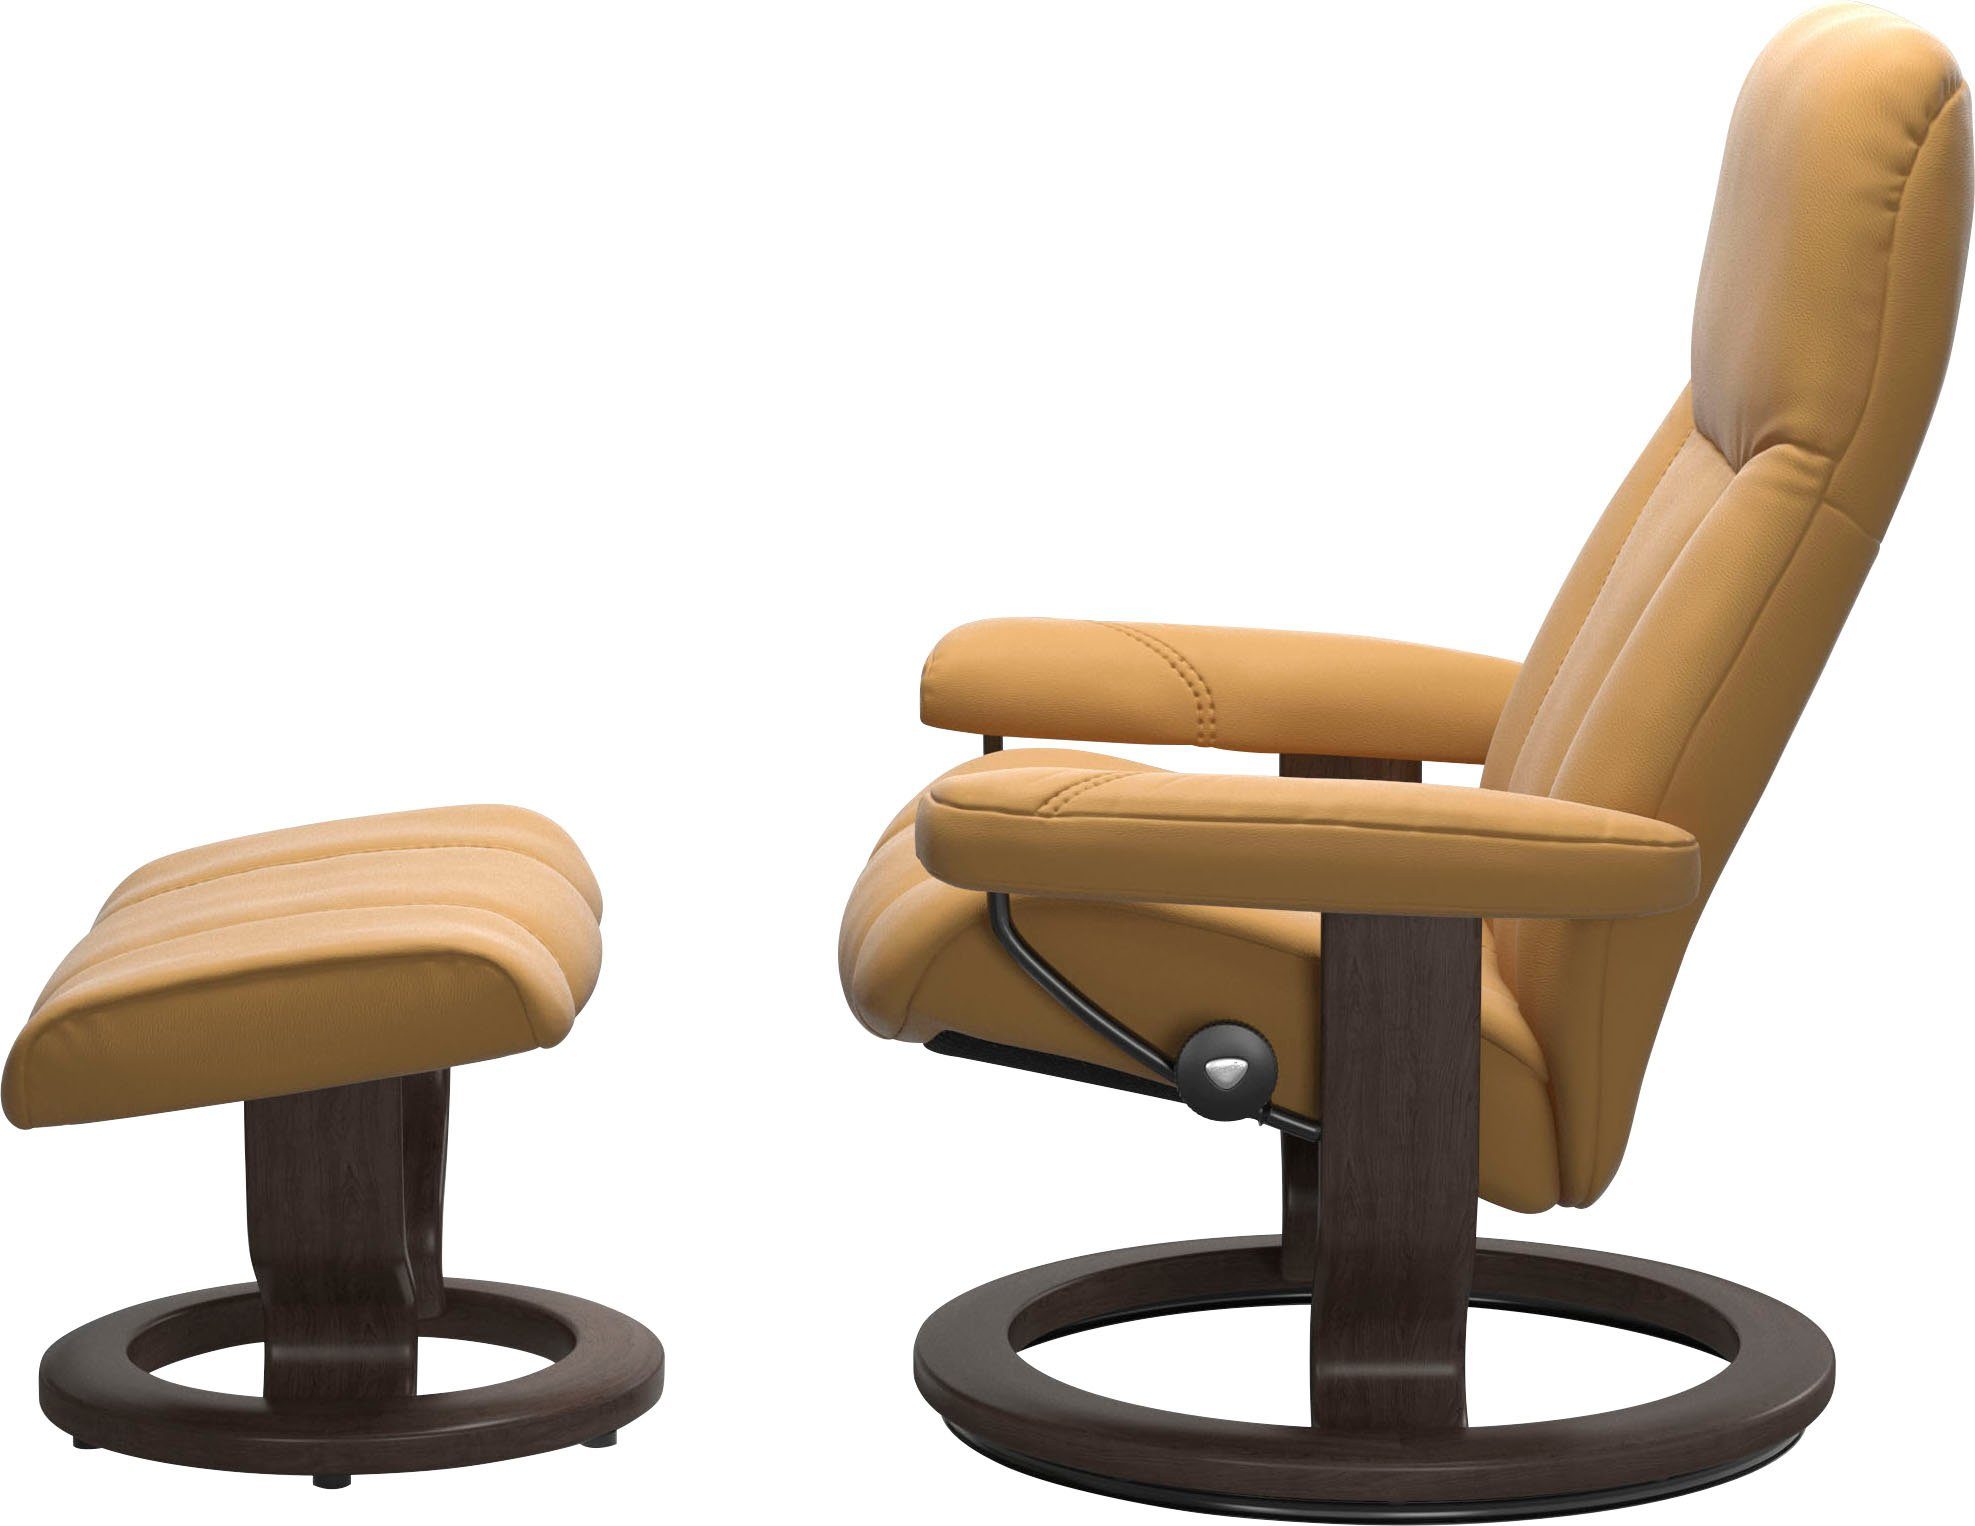 M, Consul, Gestell mit Wenge Classic Größe Stressless® Relaxsessel Base,